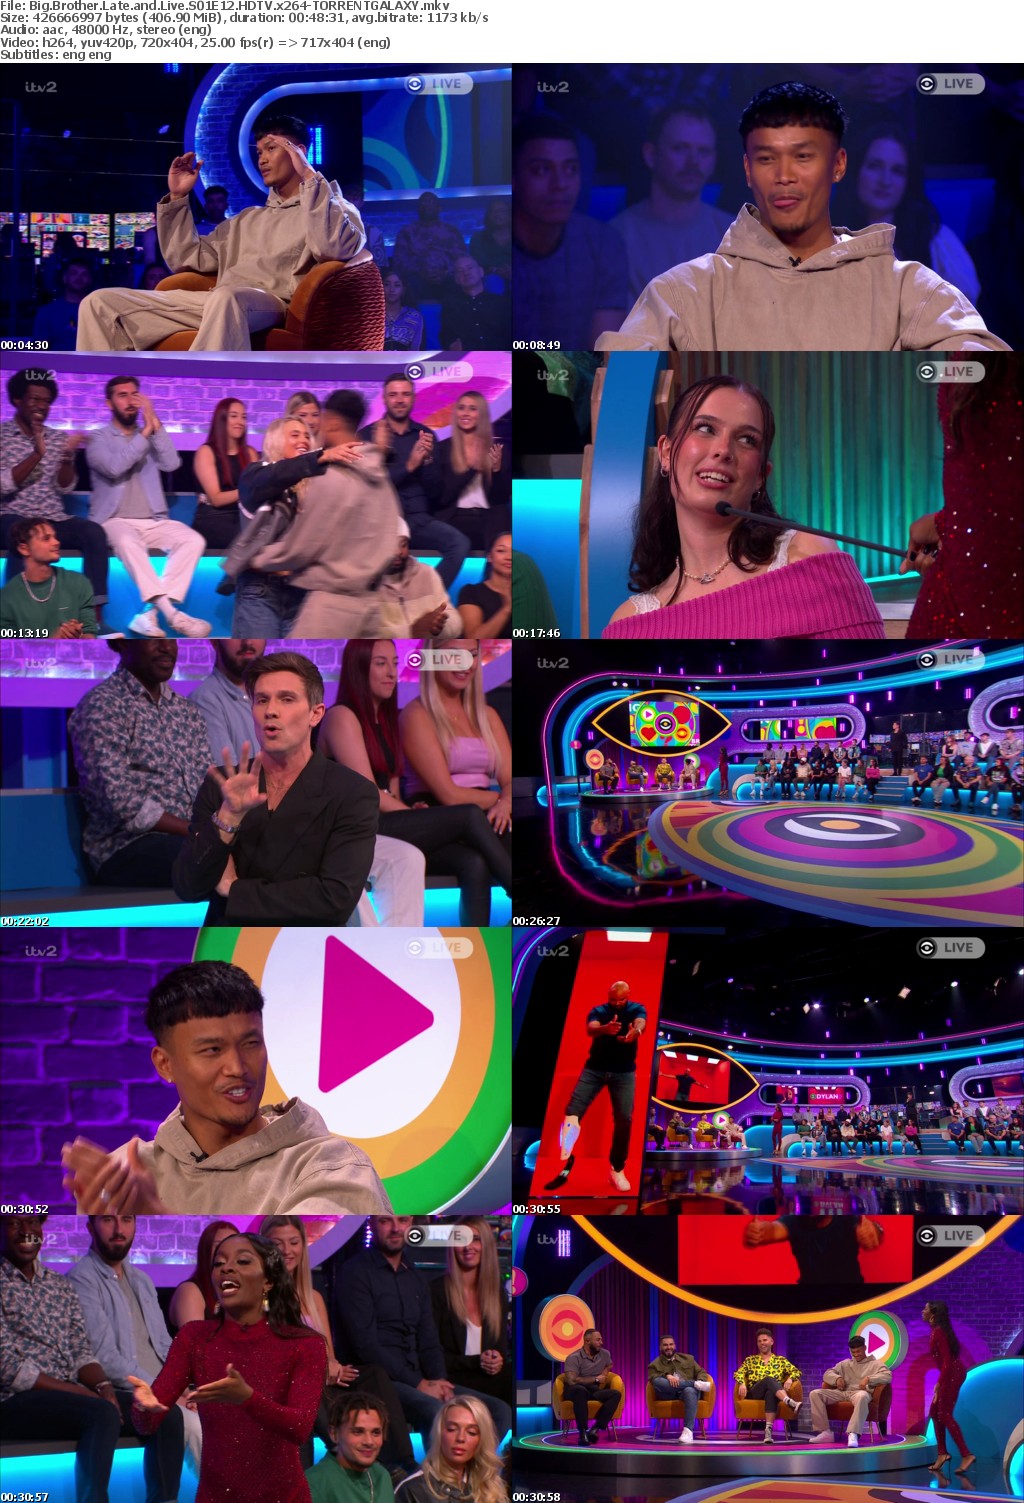 Big Brother Late and Live S01E12 HDTV x264-GALAXY